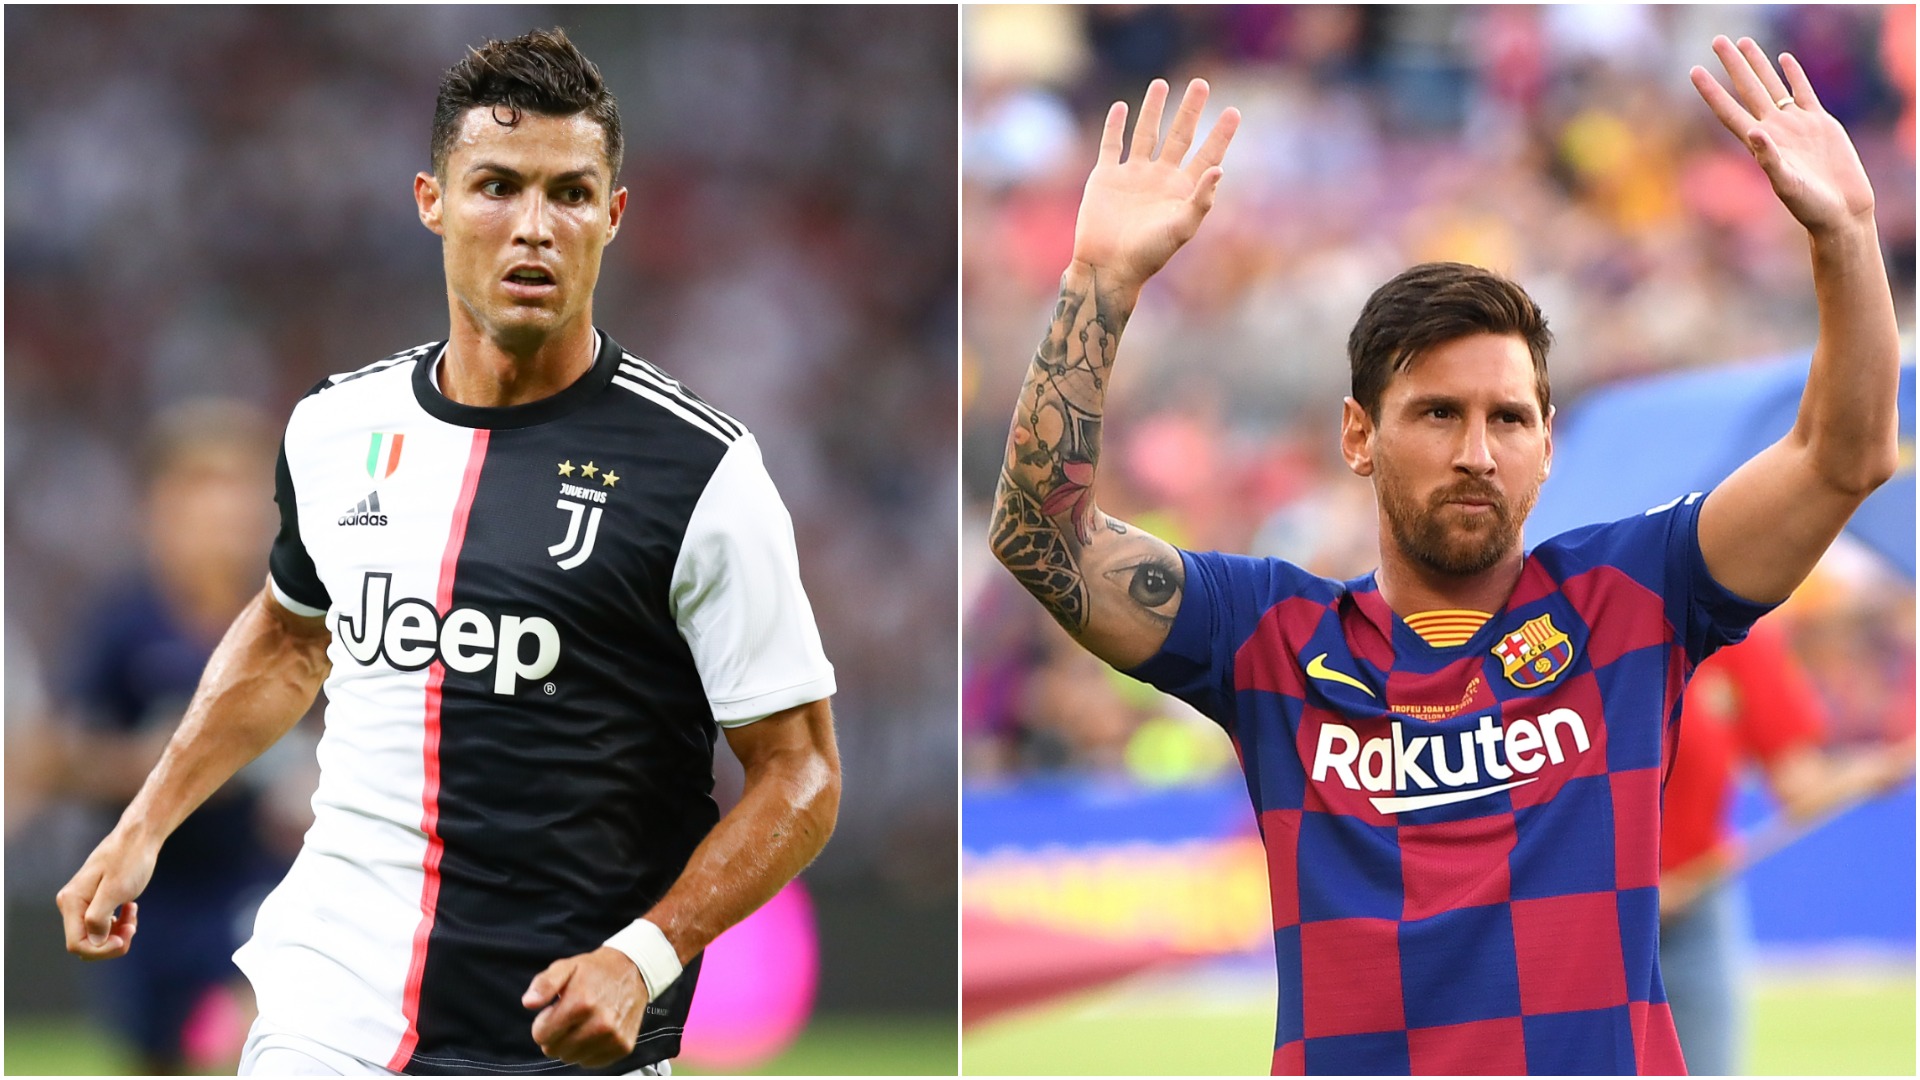 Marco van Basten weighed in on the Cristiano Ronaldo and Lionel Messi debate.